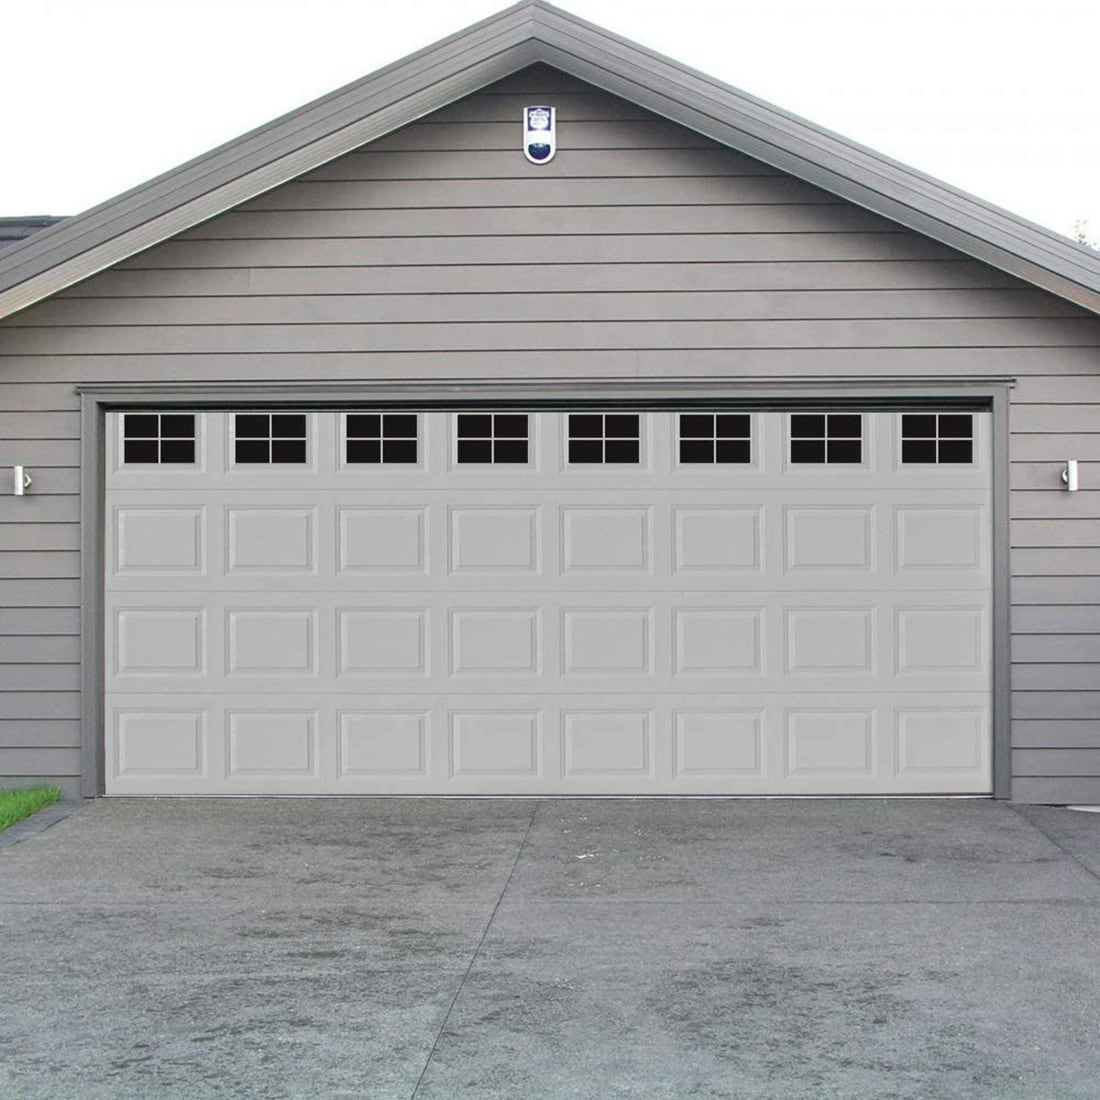 58 clopay Garage door panel replacement lowes Central Cost